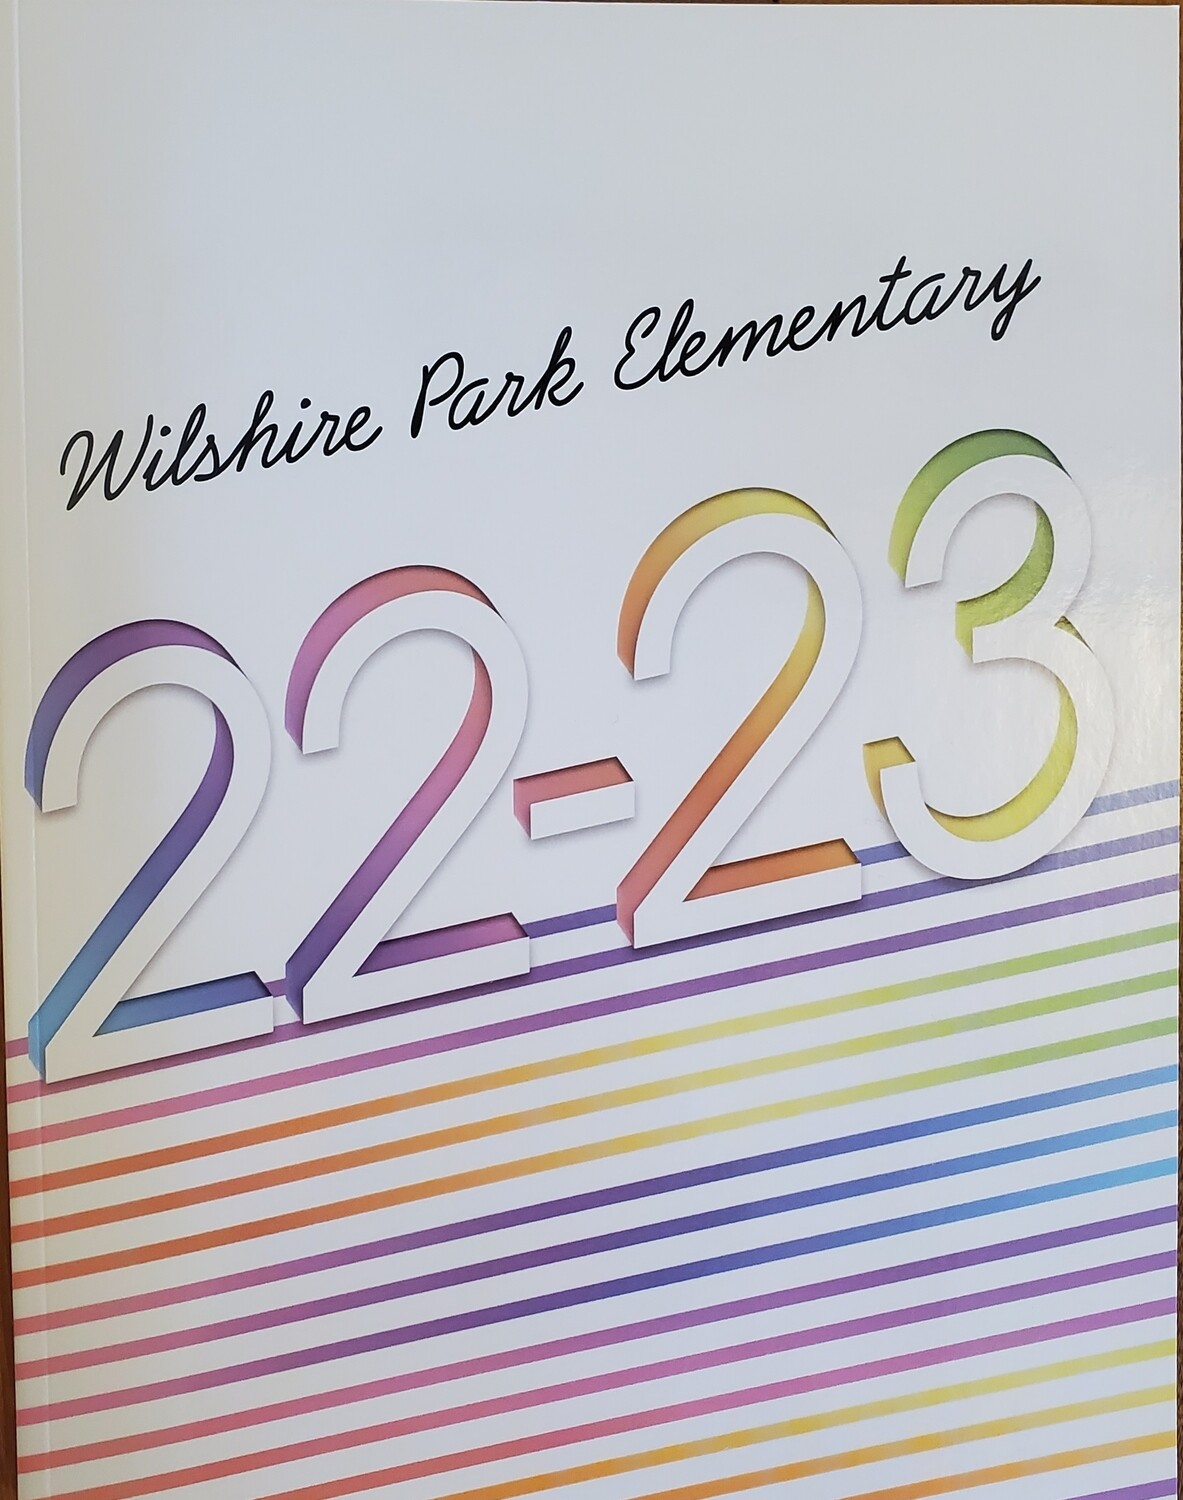 2022-2023 Yearbook